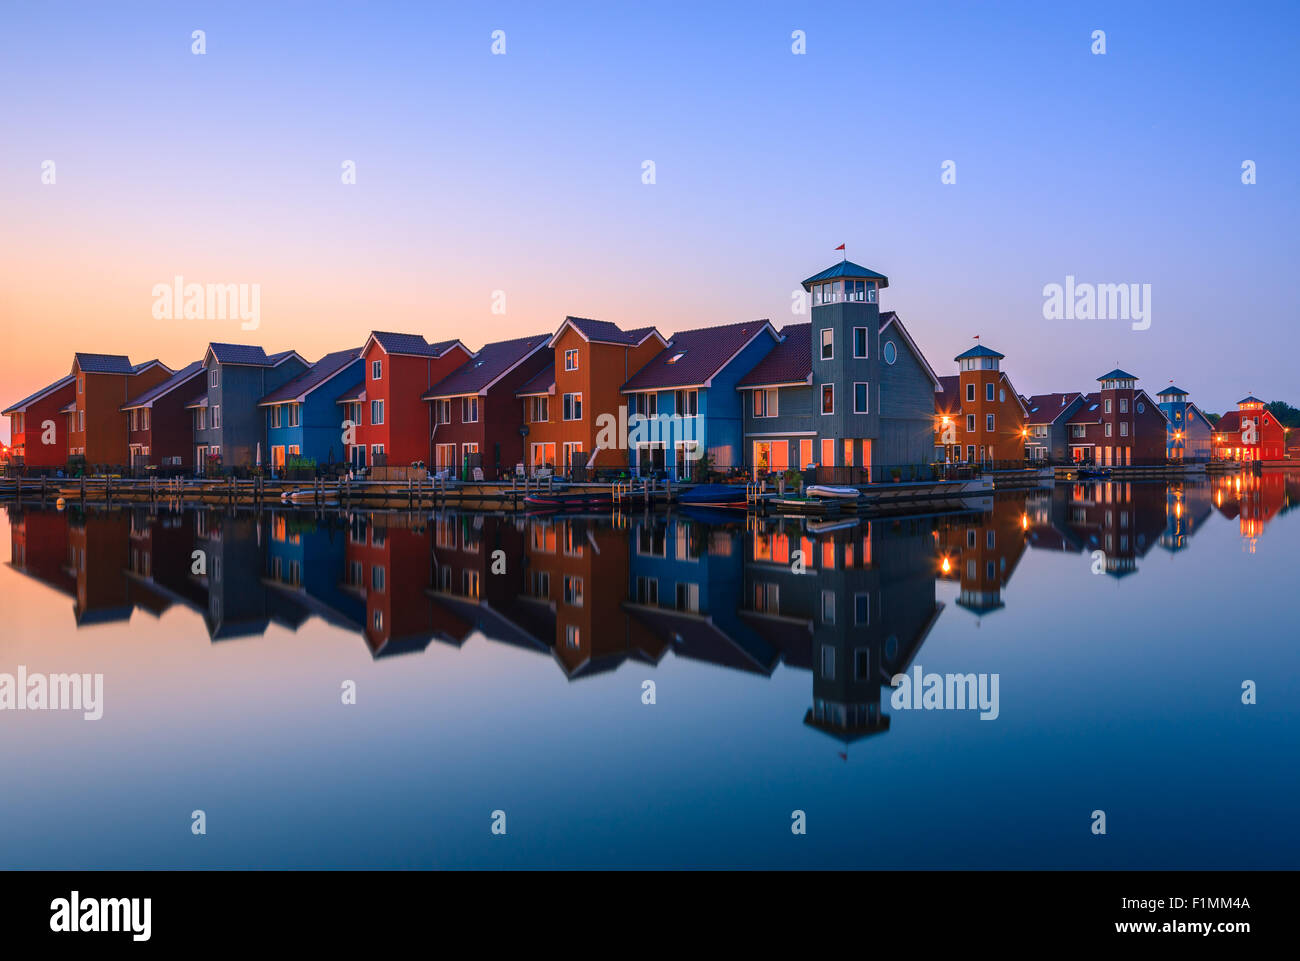 Colourful houses at Reitdiephaven, Groningen, Netherlands Stock Photo